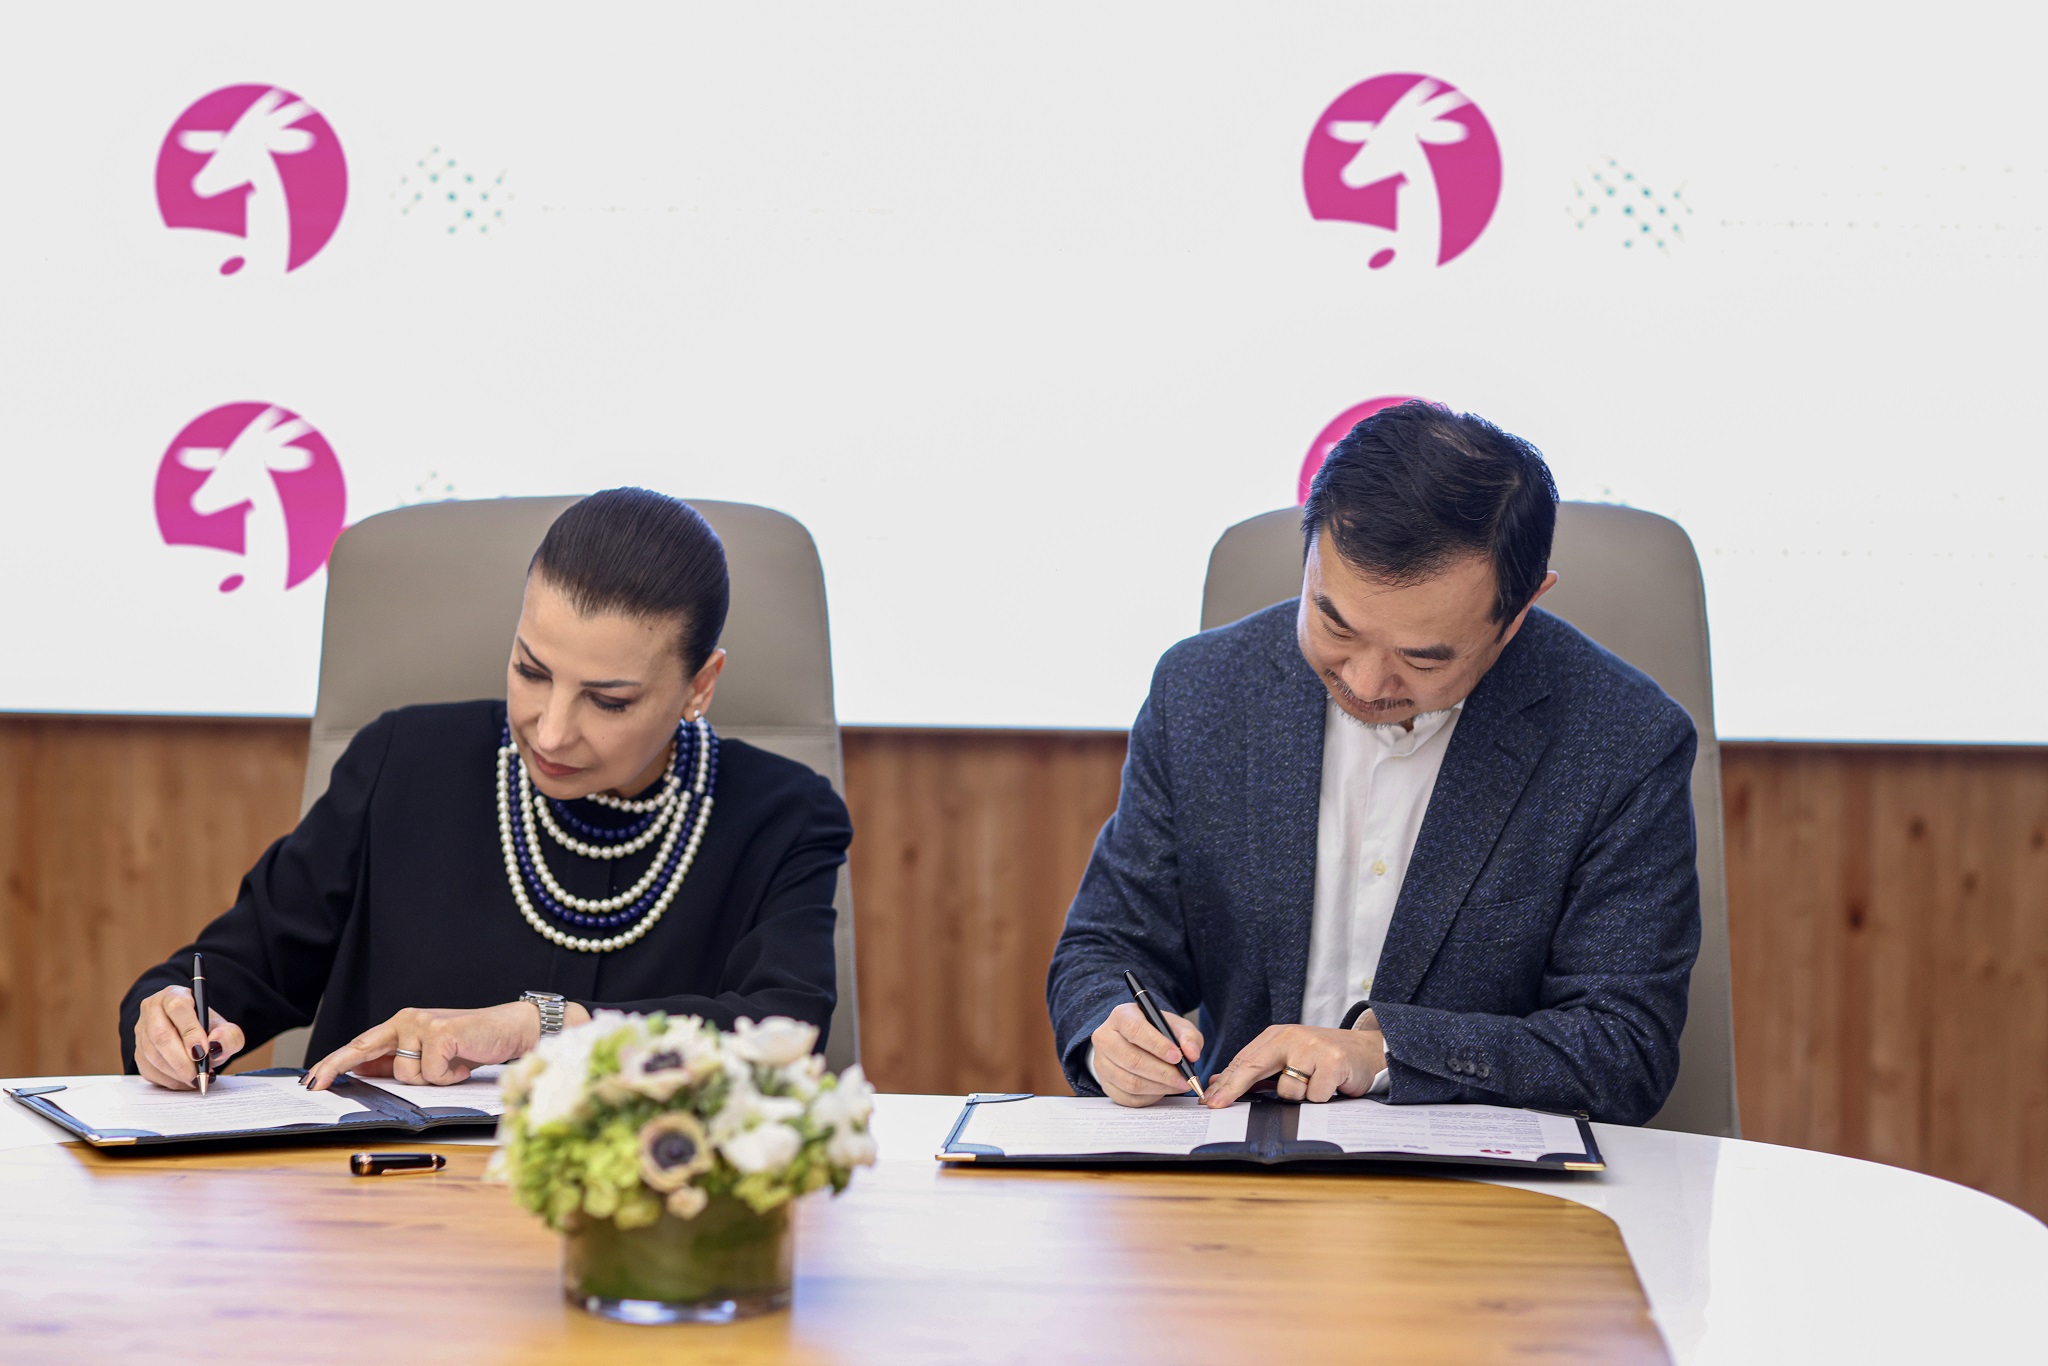 Abu Dhabi Music & Arts Foundation Signs MoU with Mohammed bin Zayed University of Artificial Intelligence